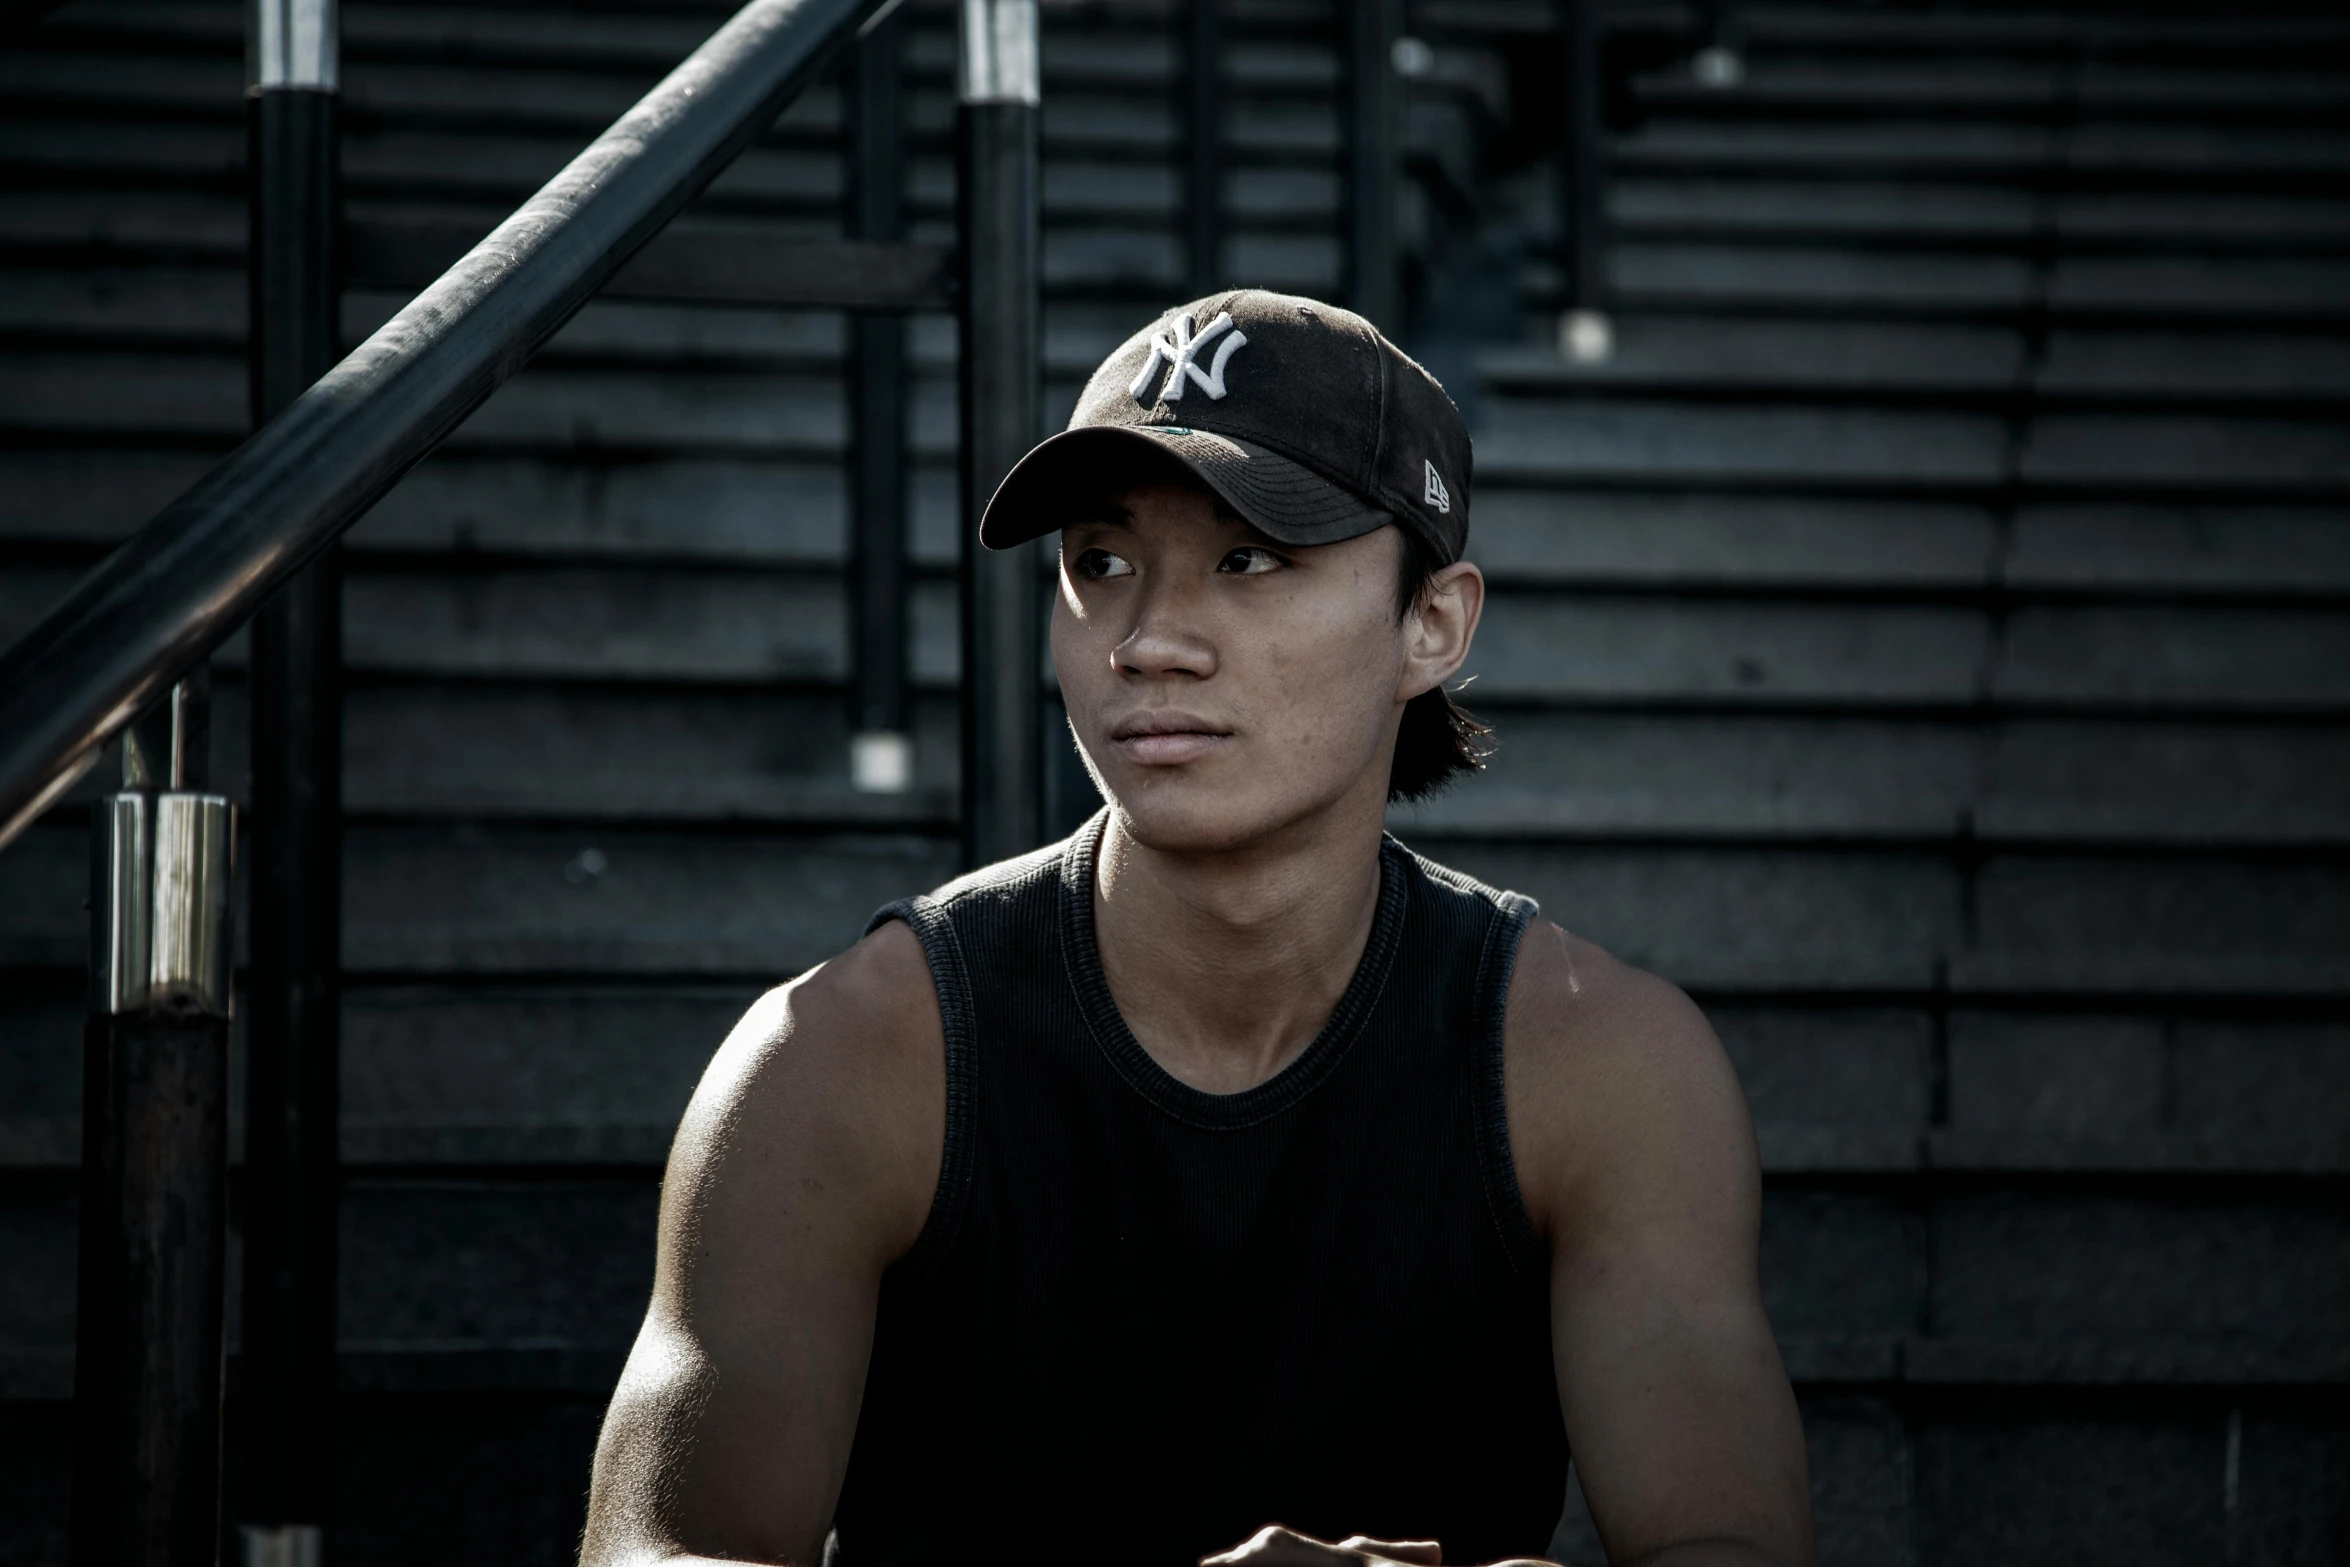 a person wearing a baseball cap sits on some steps